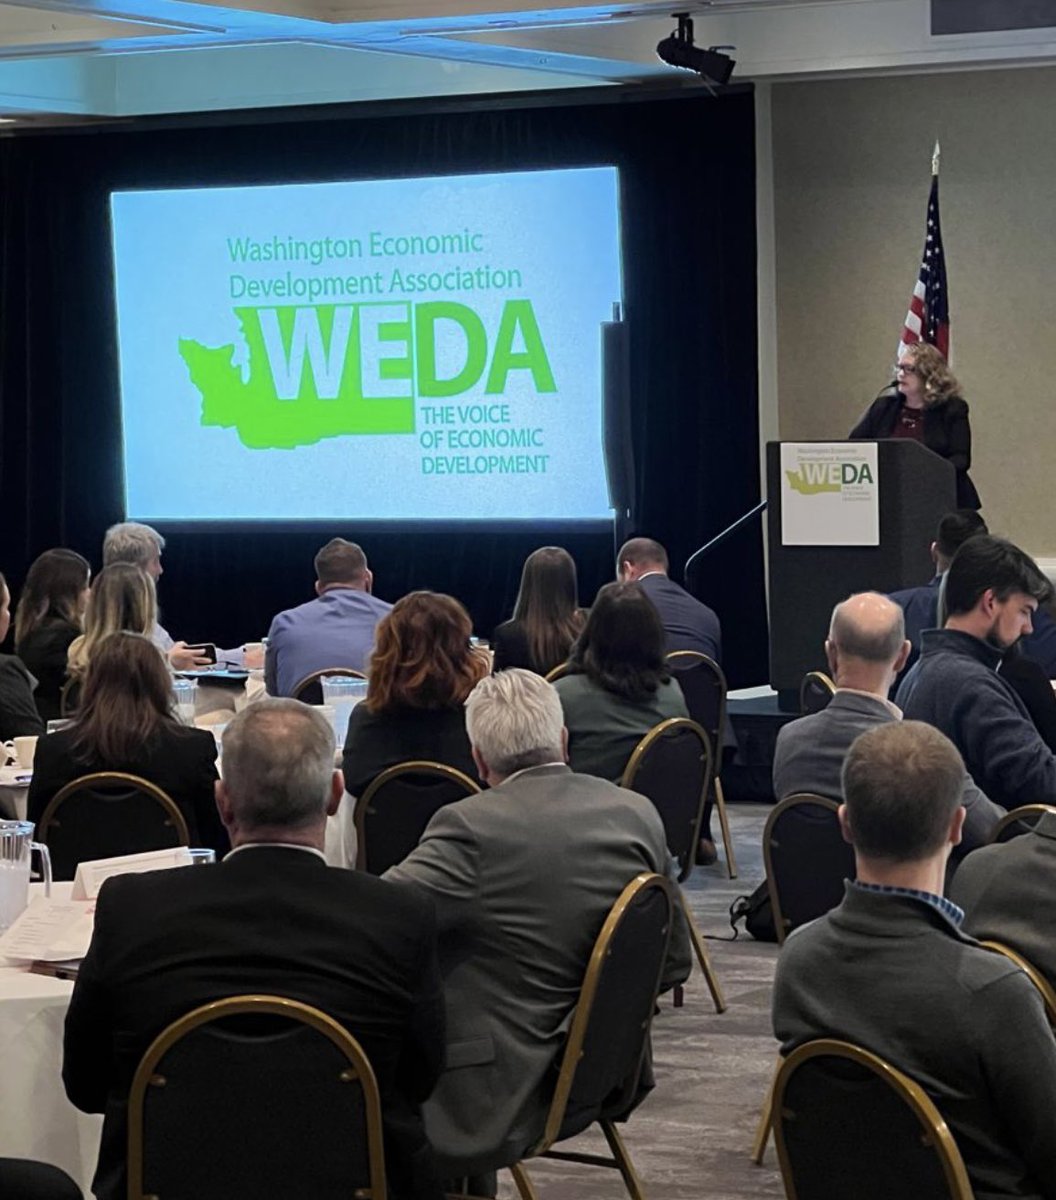 It was great to visit Olympia this week for the @WashingtonEcon1 (WEDA) Conference and be among so many inspiring economic leaders and partners. Great things are happening in Washington state. #community #vitality #madeinwa #washingtonmfg #partnerships #economicdevelopment